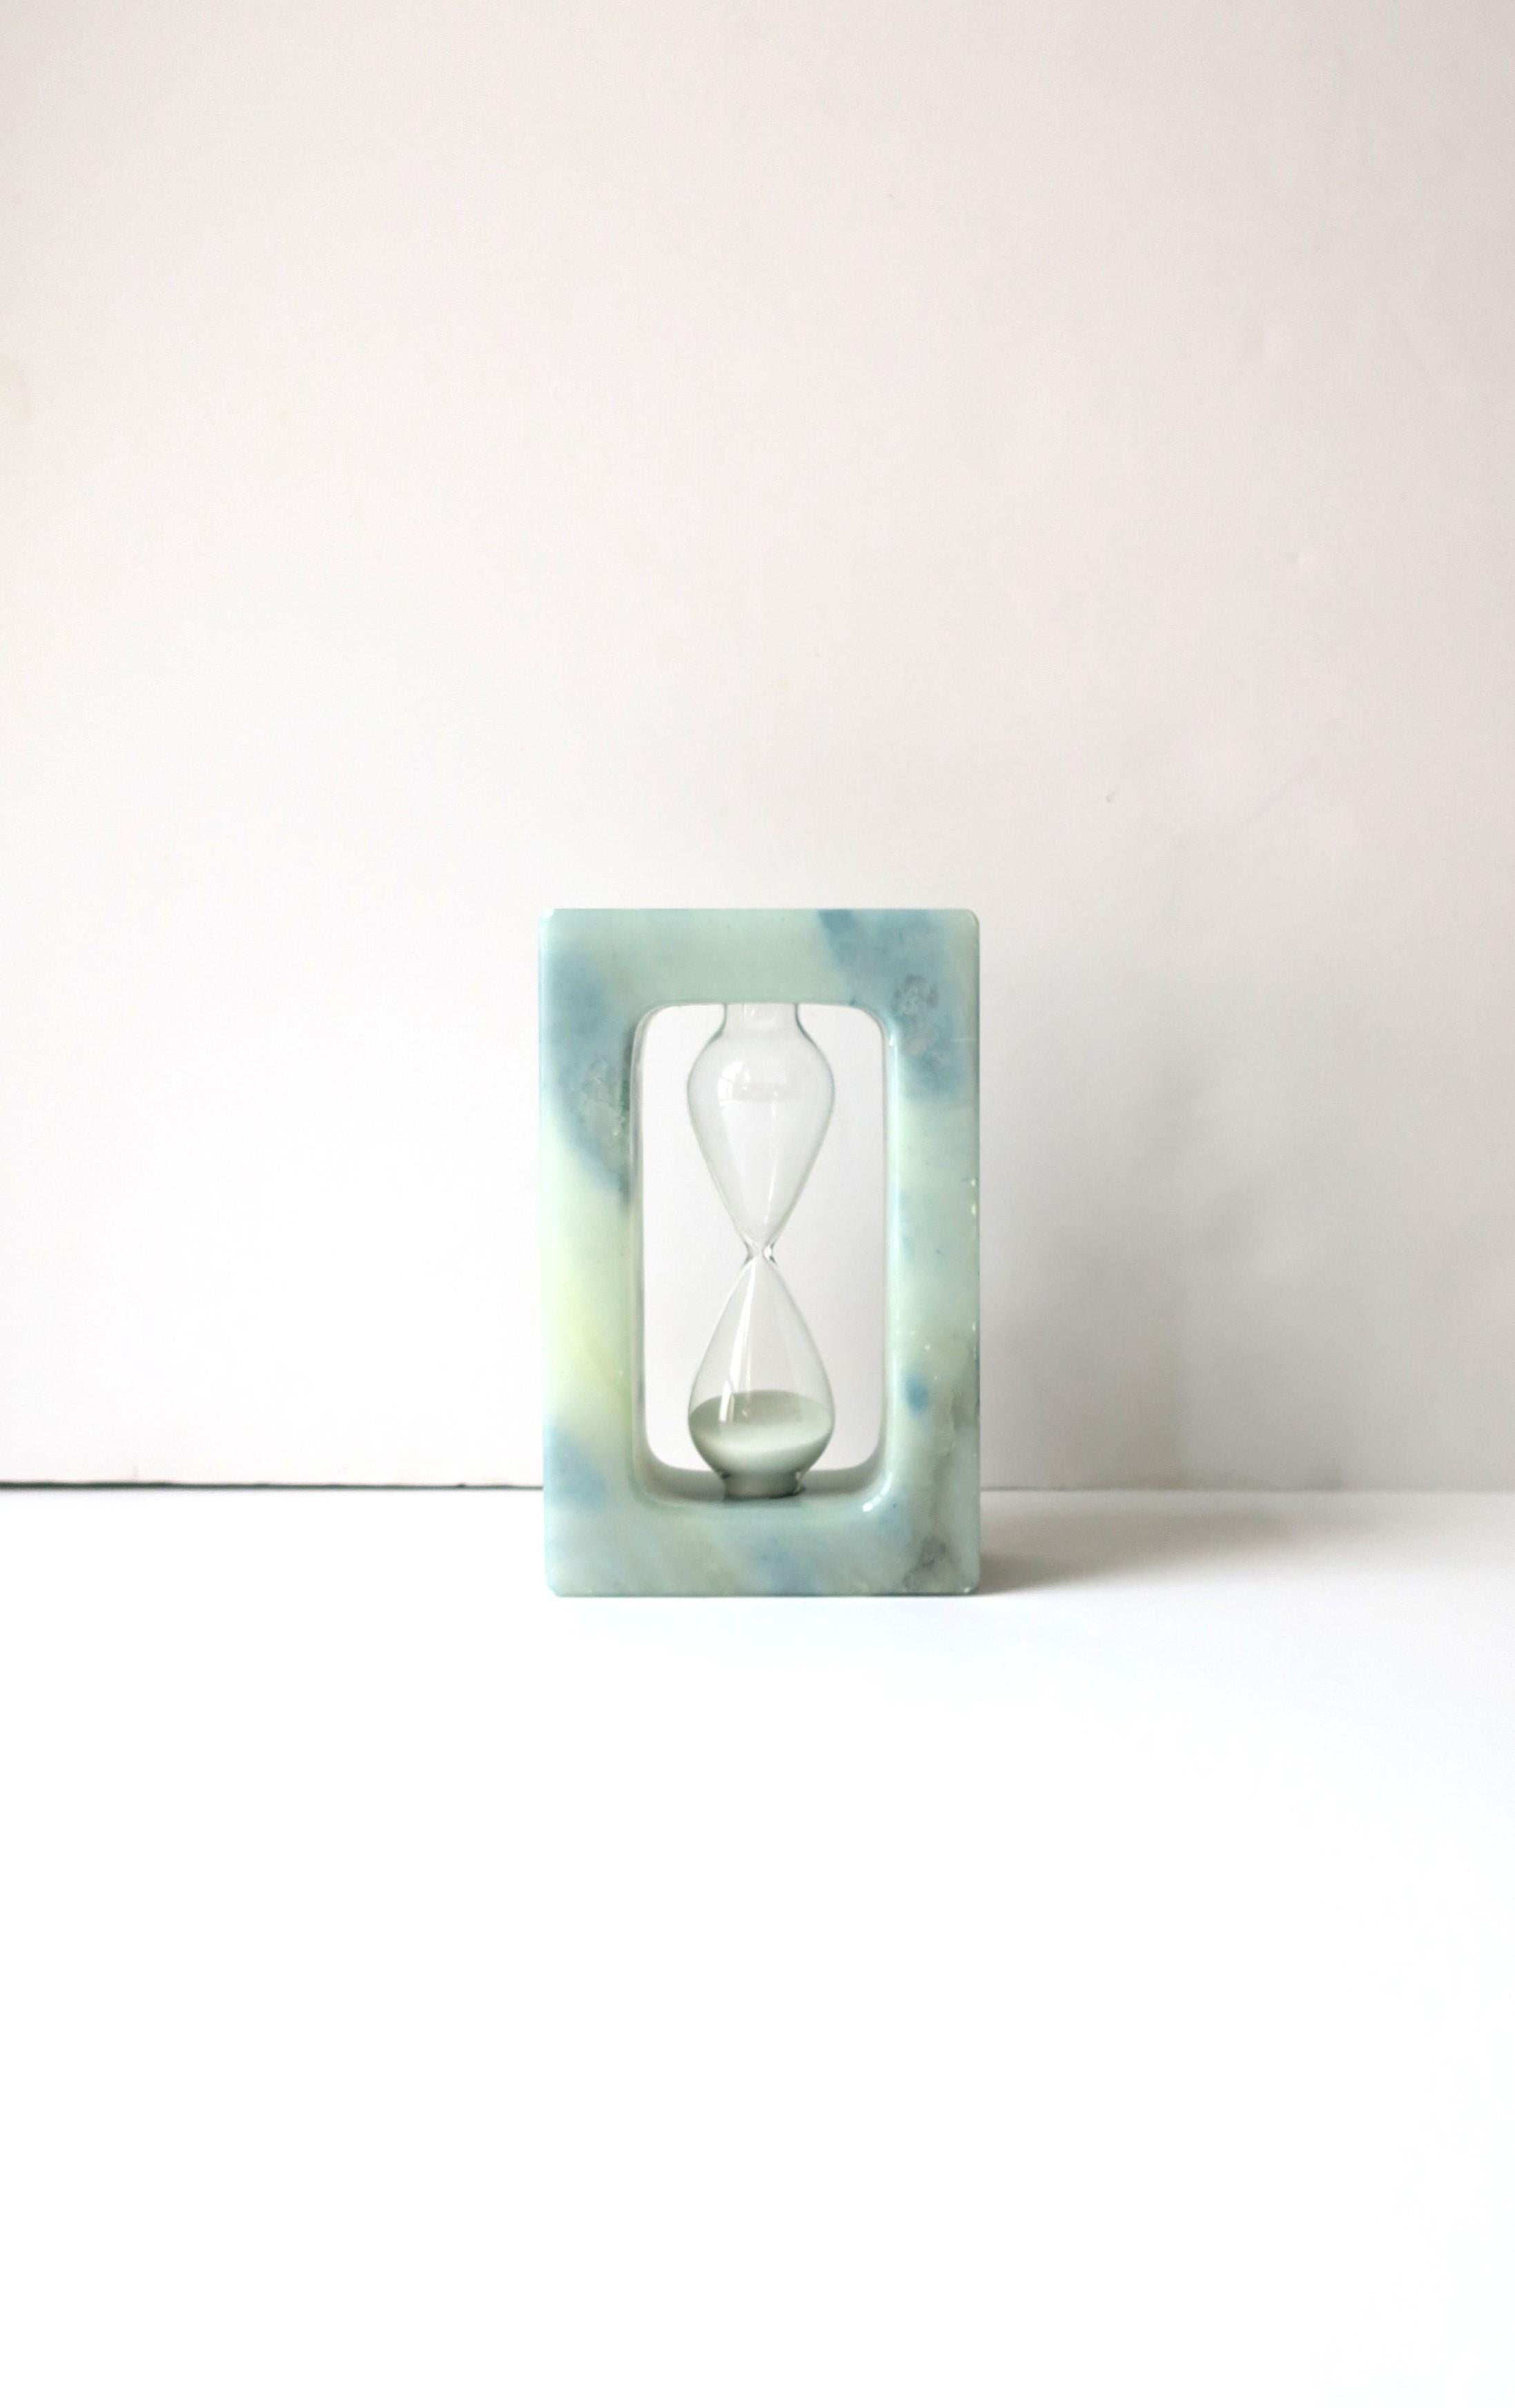 An Italian Modern Postmodern period light blue alabaster marble hourglass timer, circa late-20th century, Italy. A great decorative object or kitchen item. 